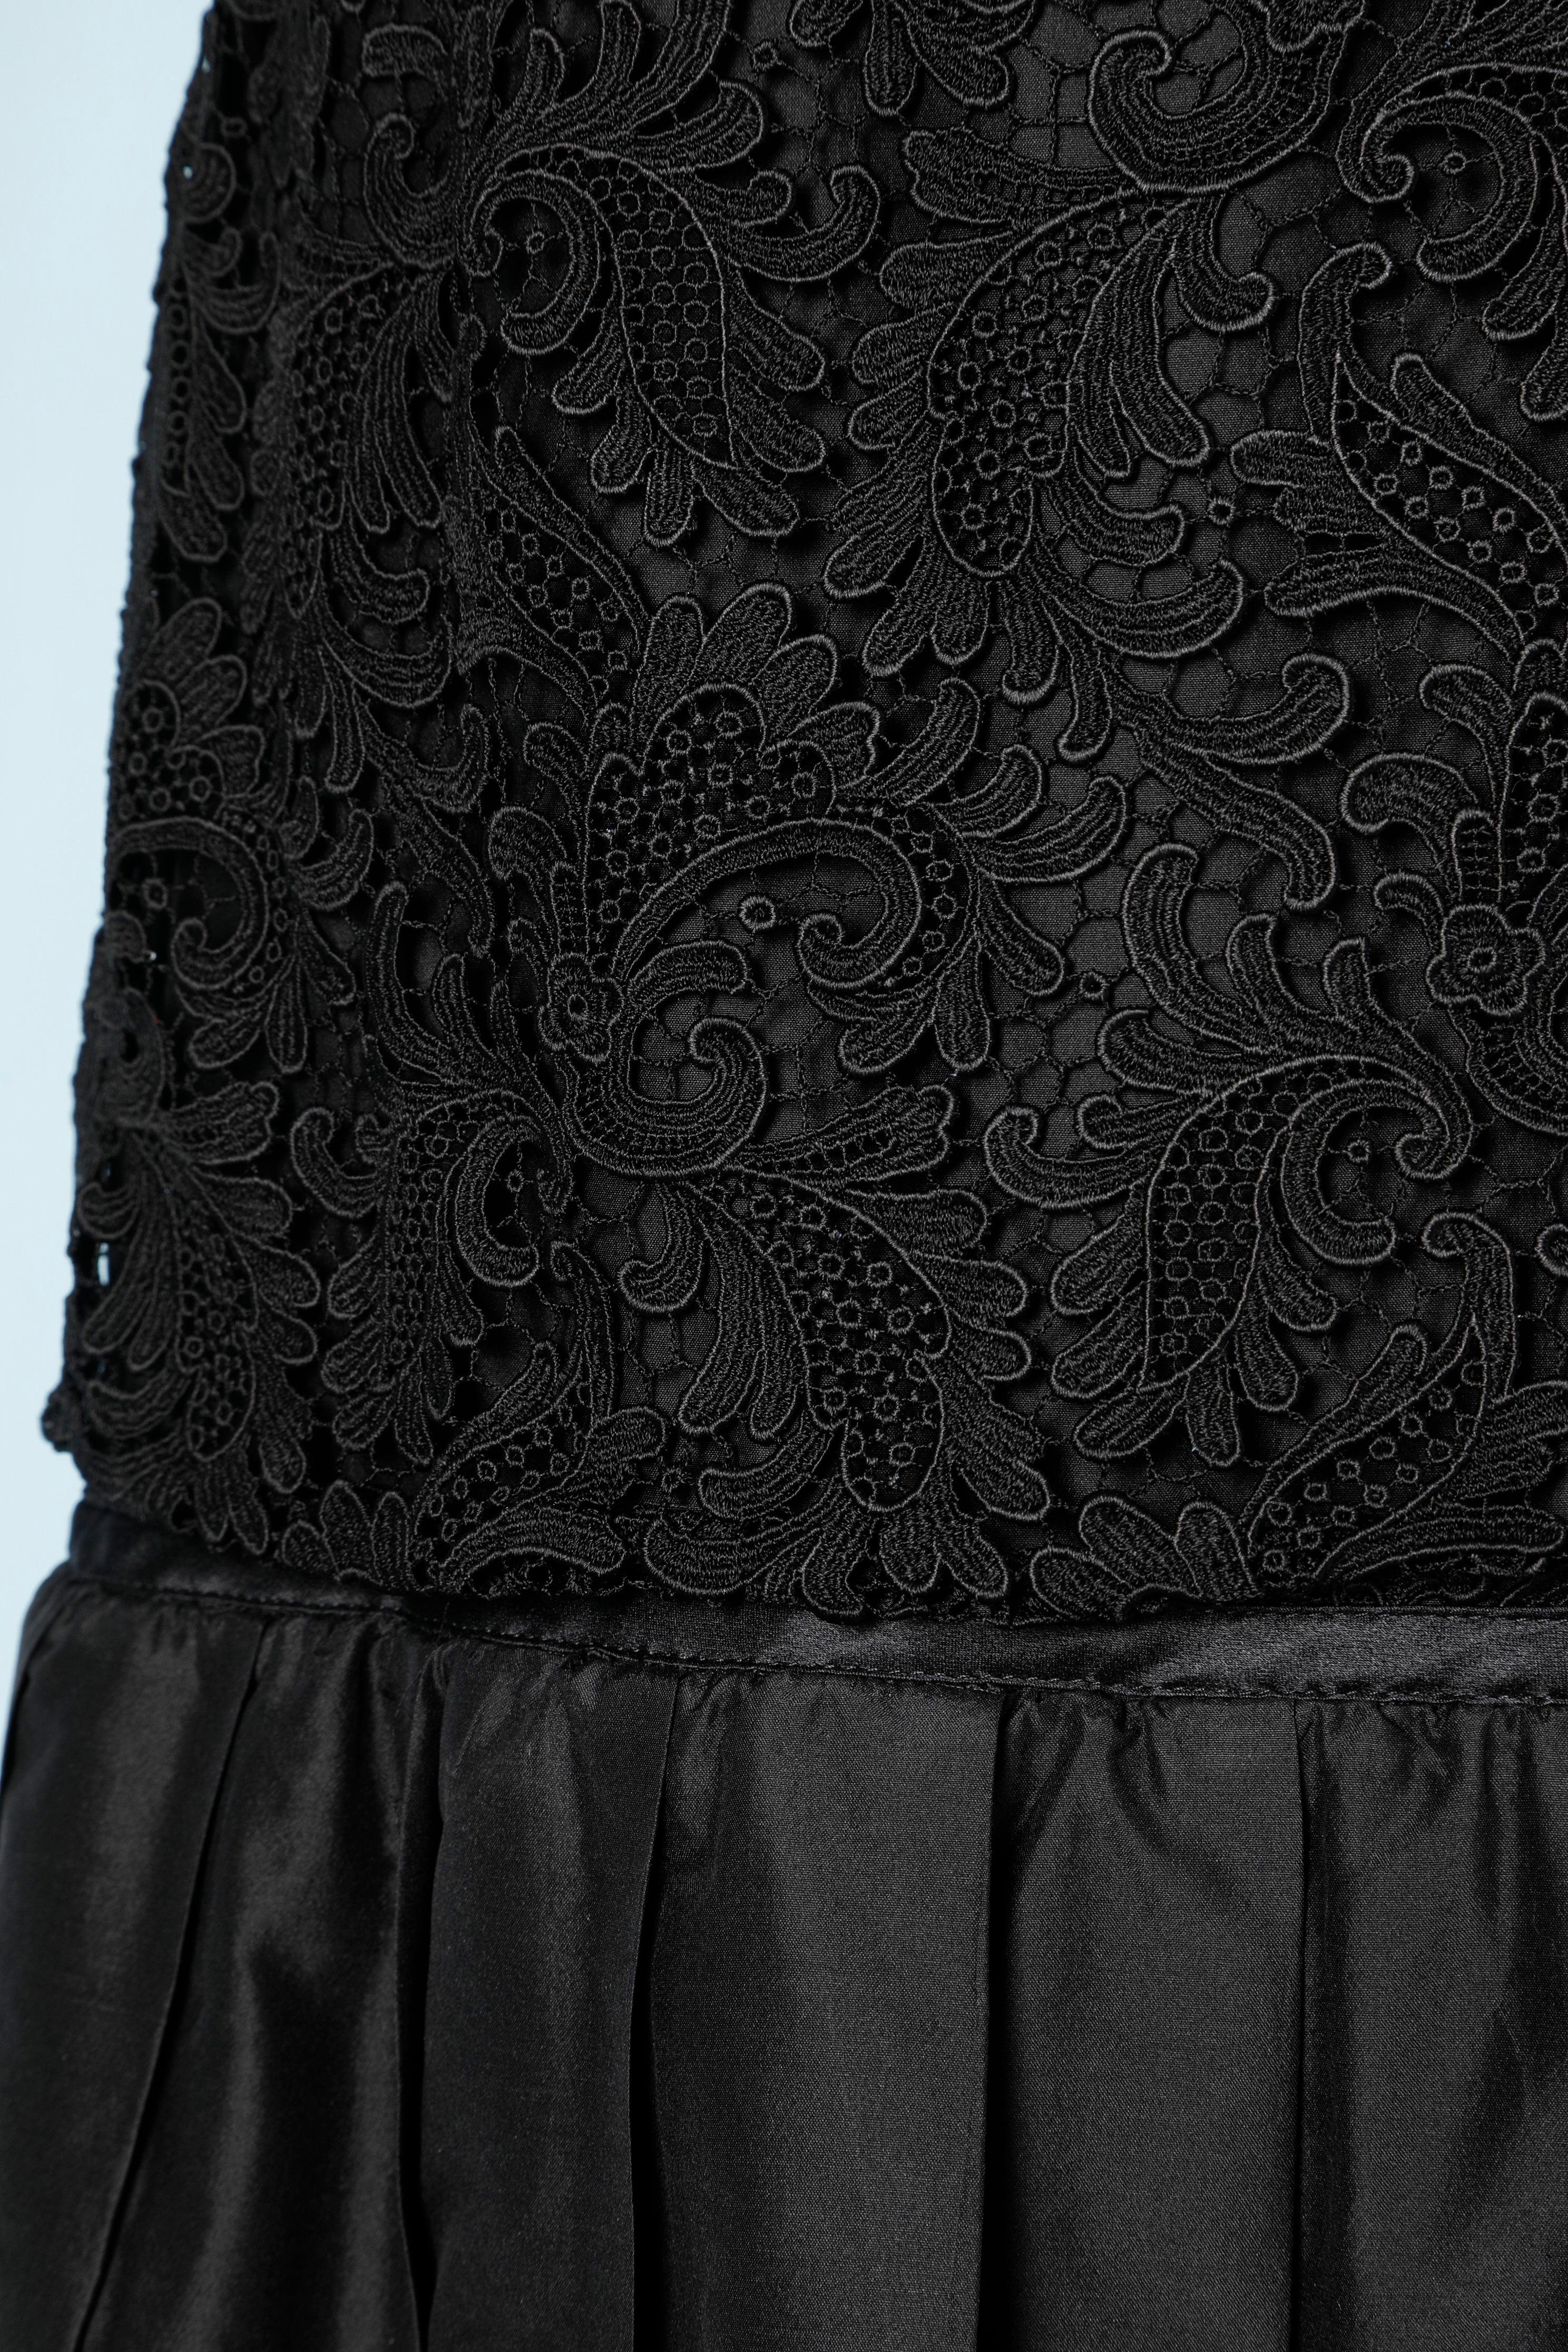 Long evening skirt in black lace and pleated taffetas.
Size M